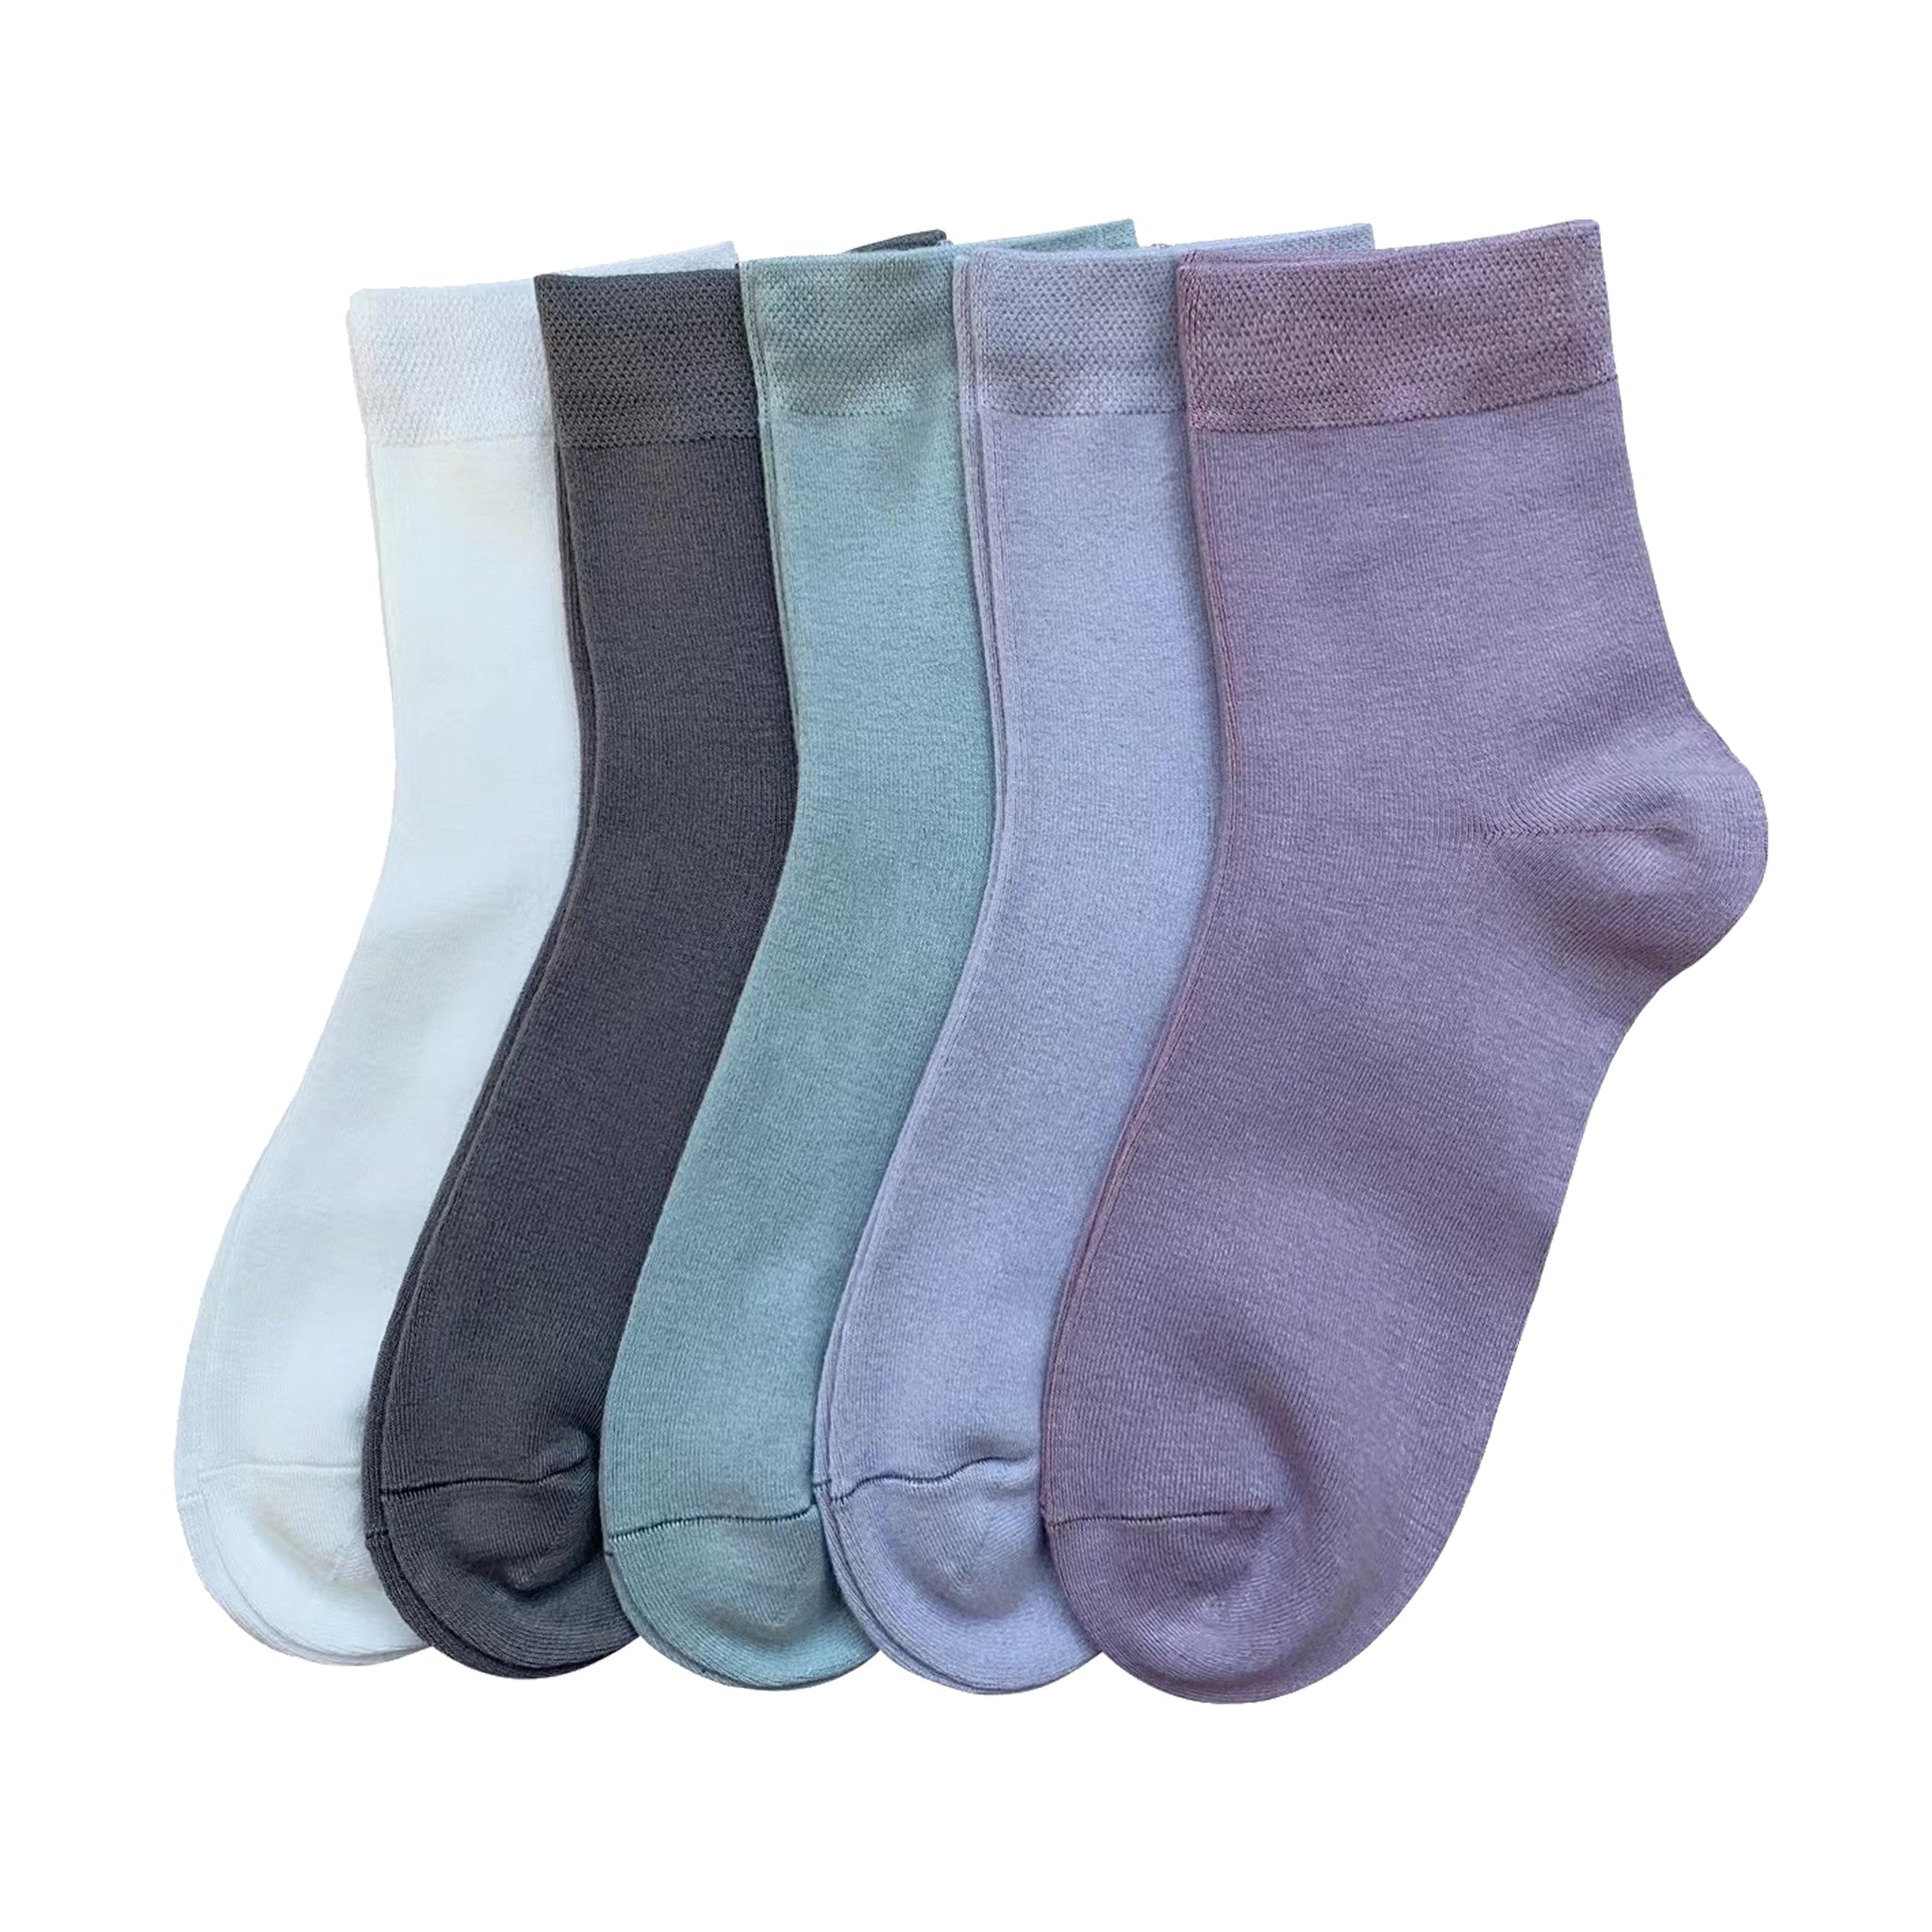 Women Ankle Socks Bamboo Crew Thin Ankle Height Boot Color Anti Odor Soft Breathable Sock 5 Pairs